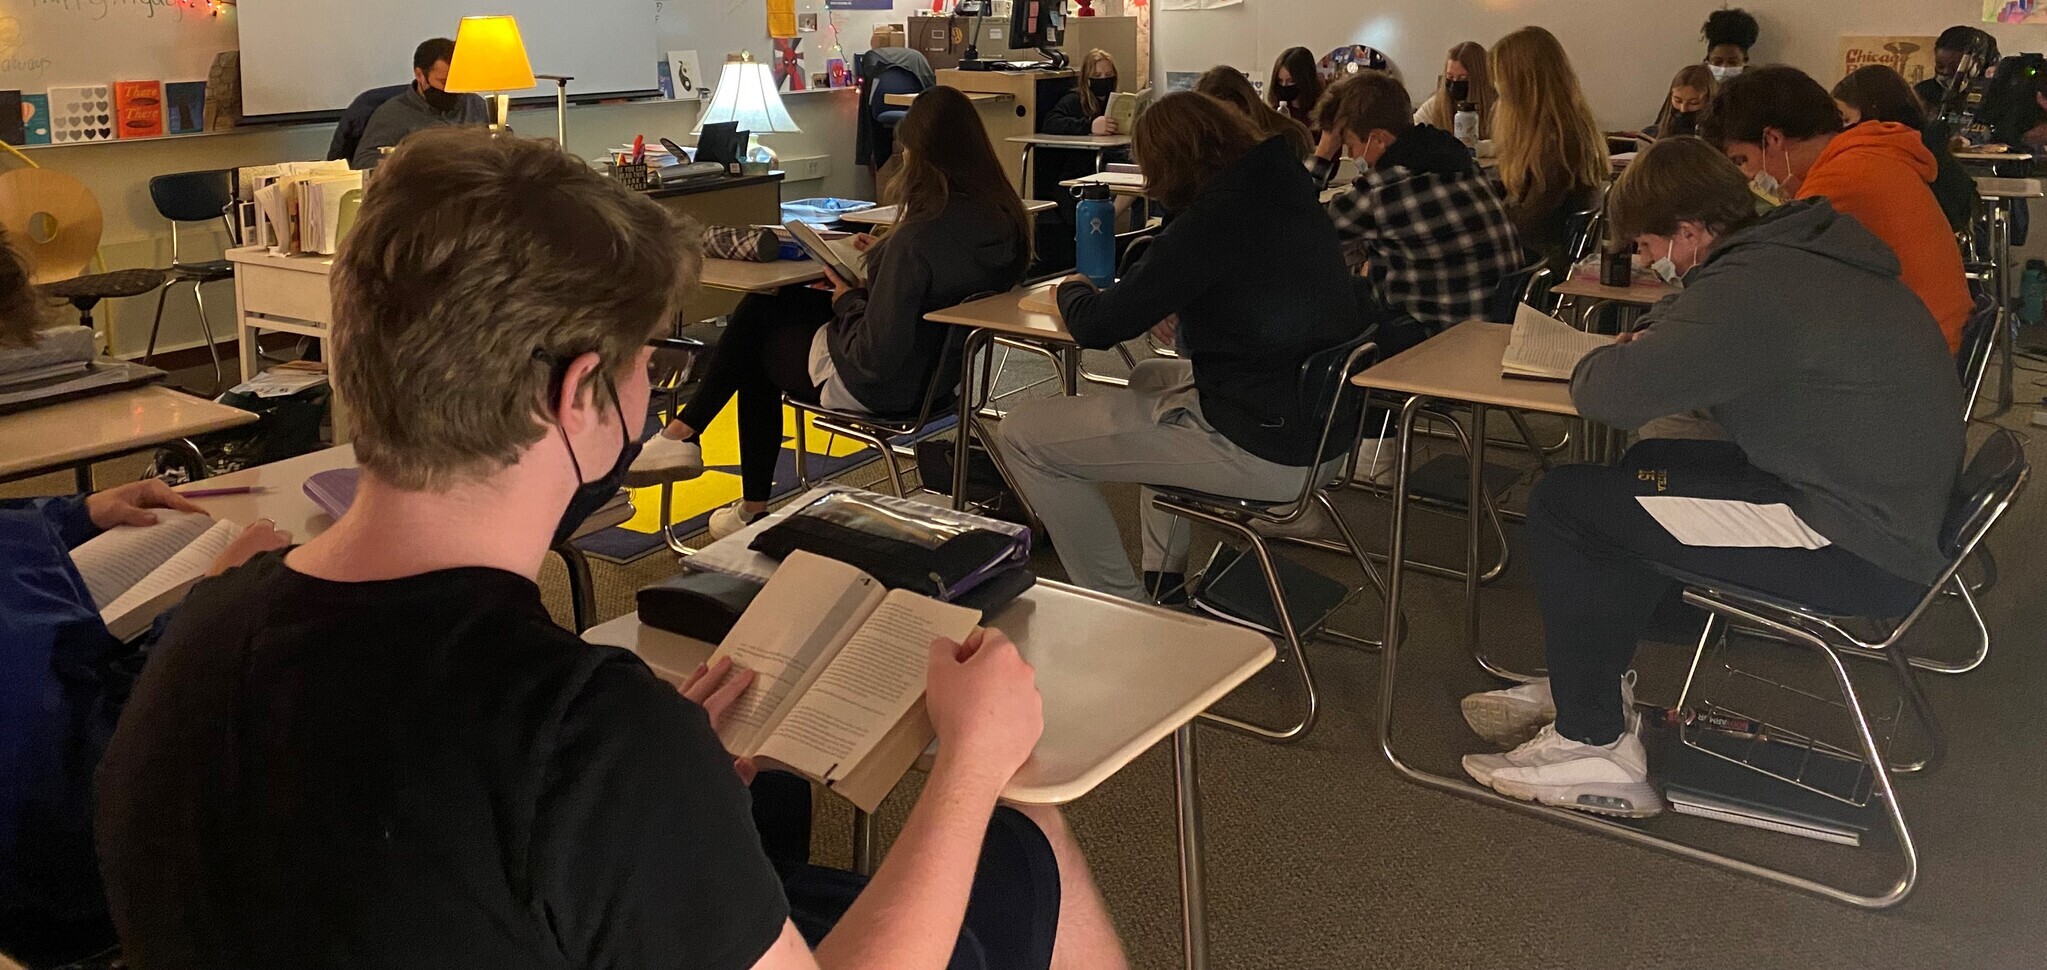 Mr. Parnin starts classes daily with students reading books in his ELA classes